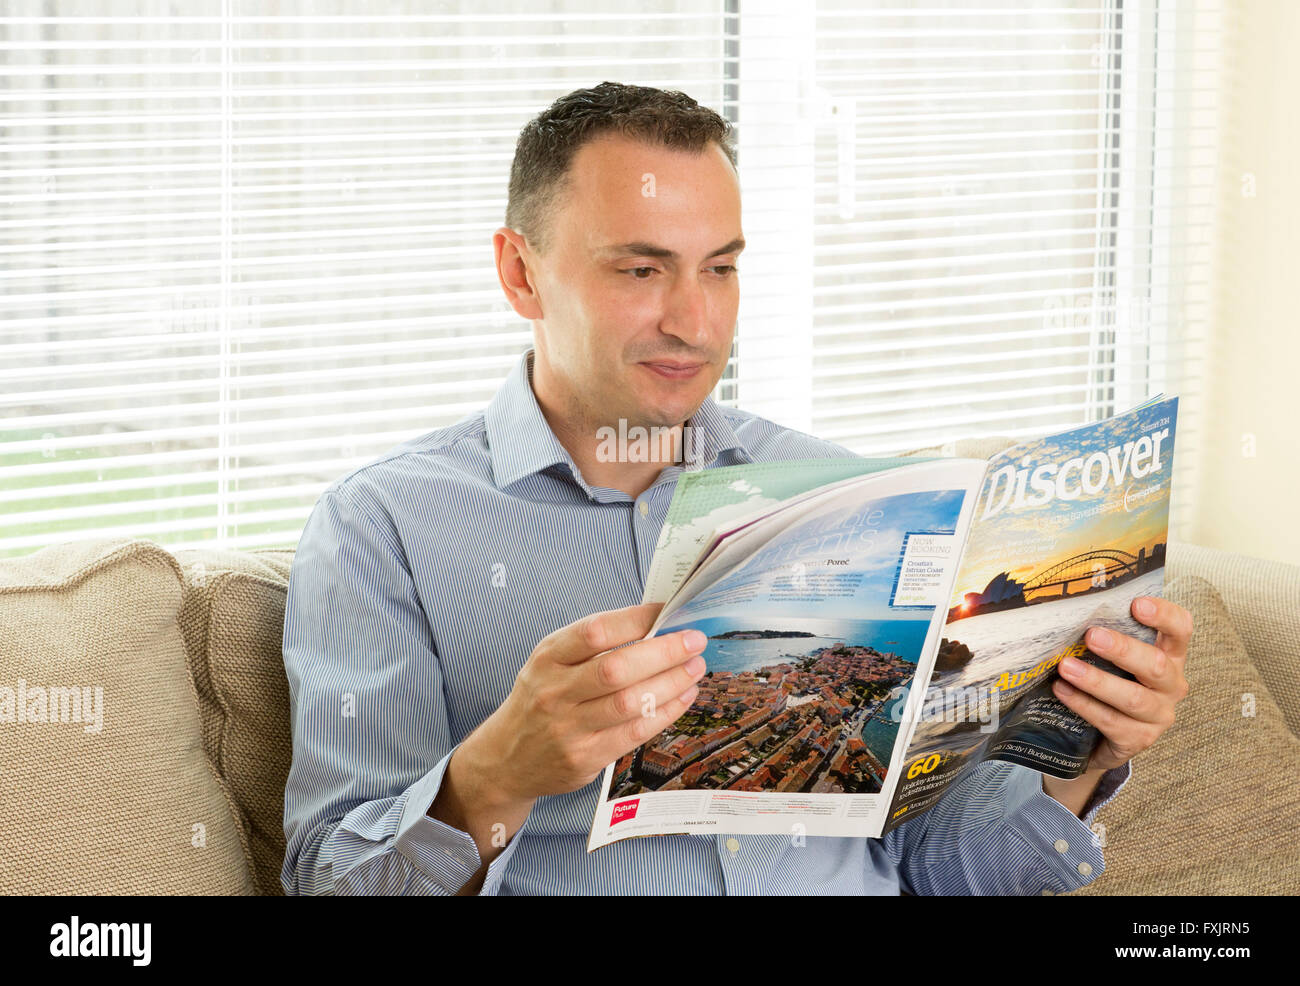 man reading a travel guide magazine Stock Photo